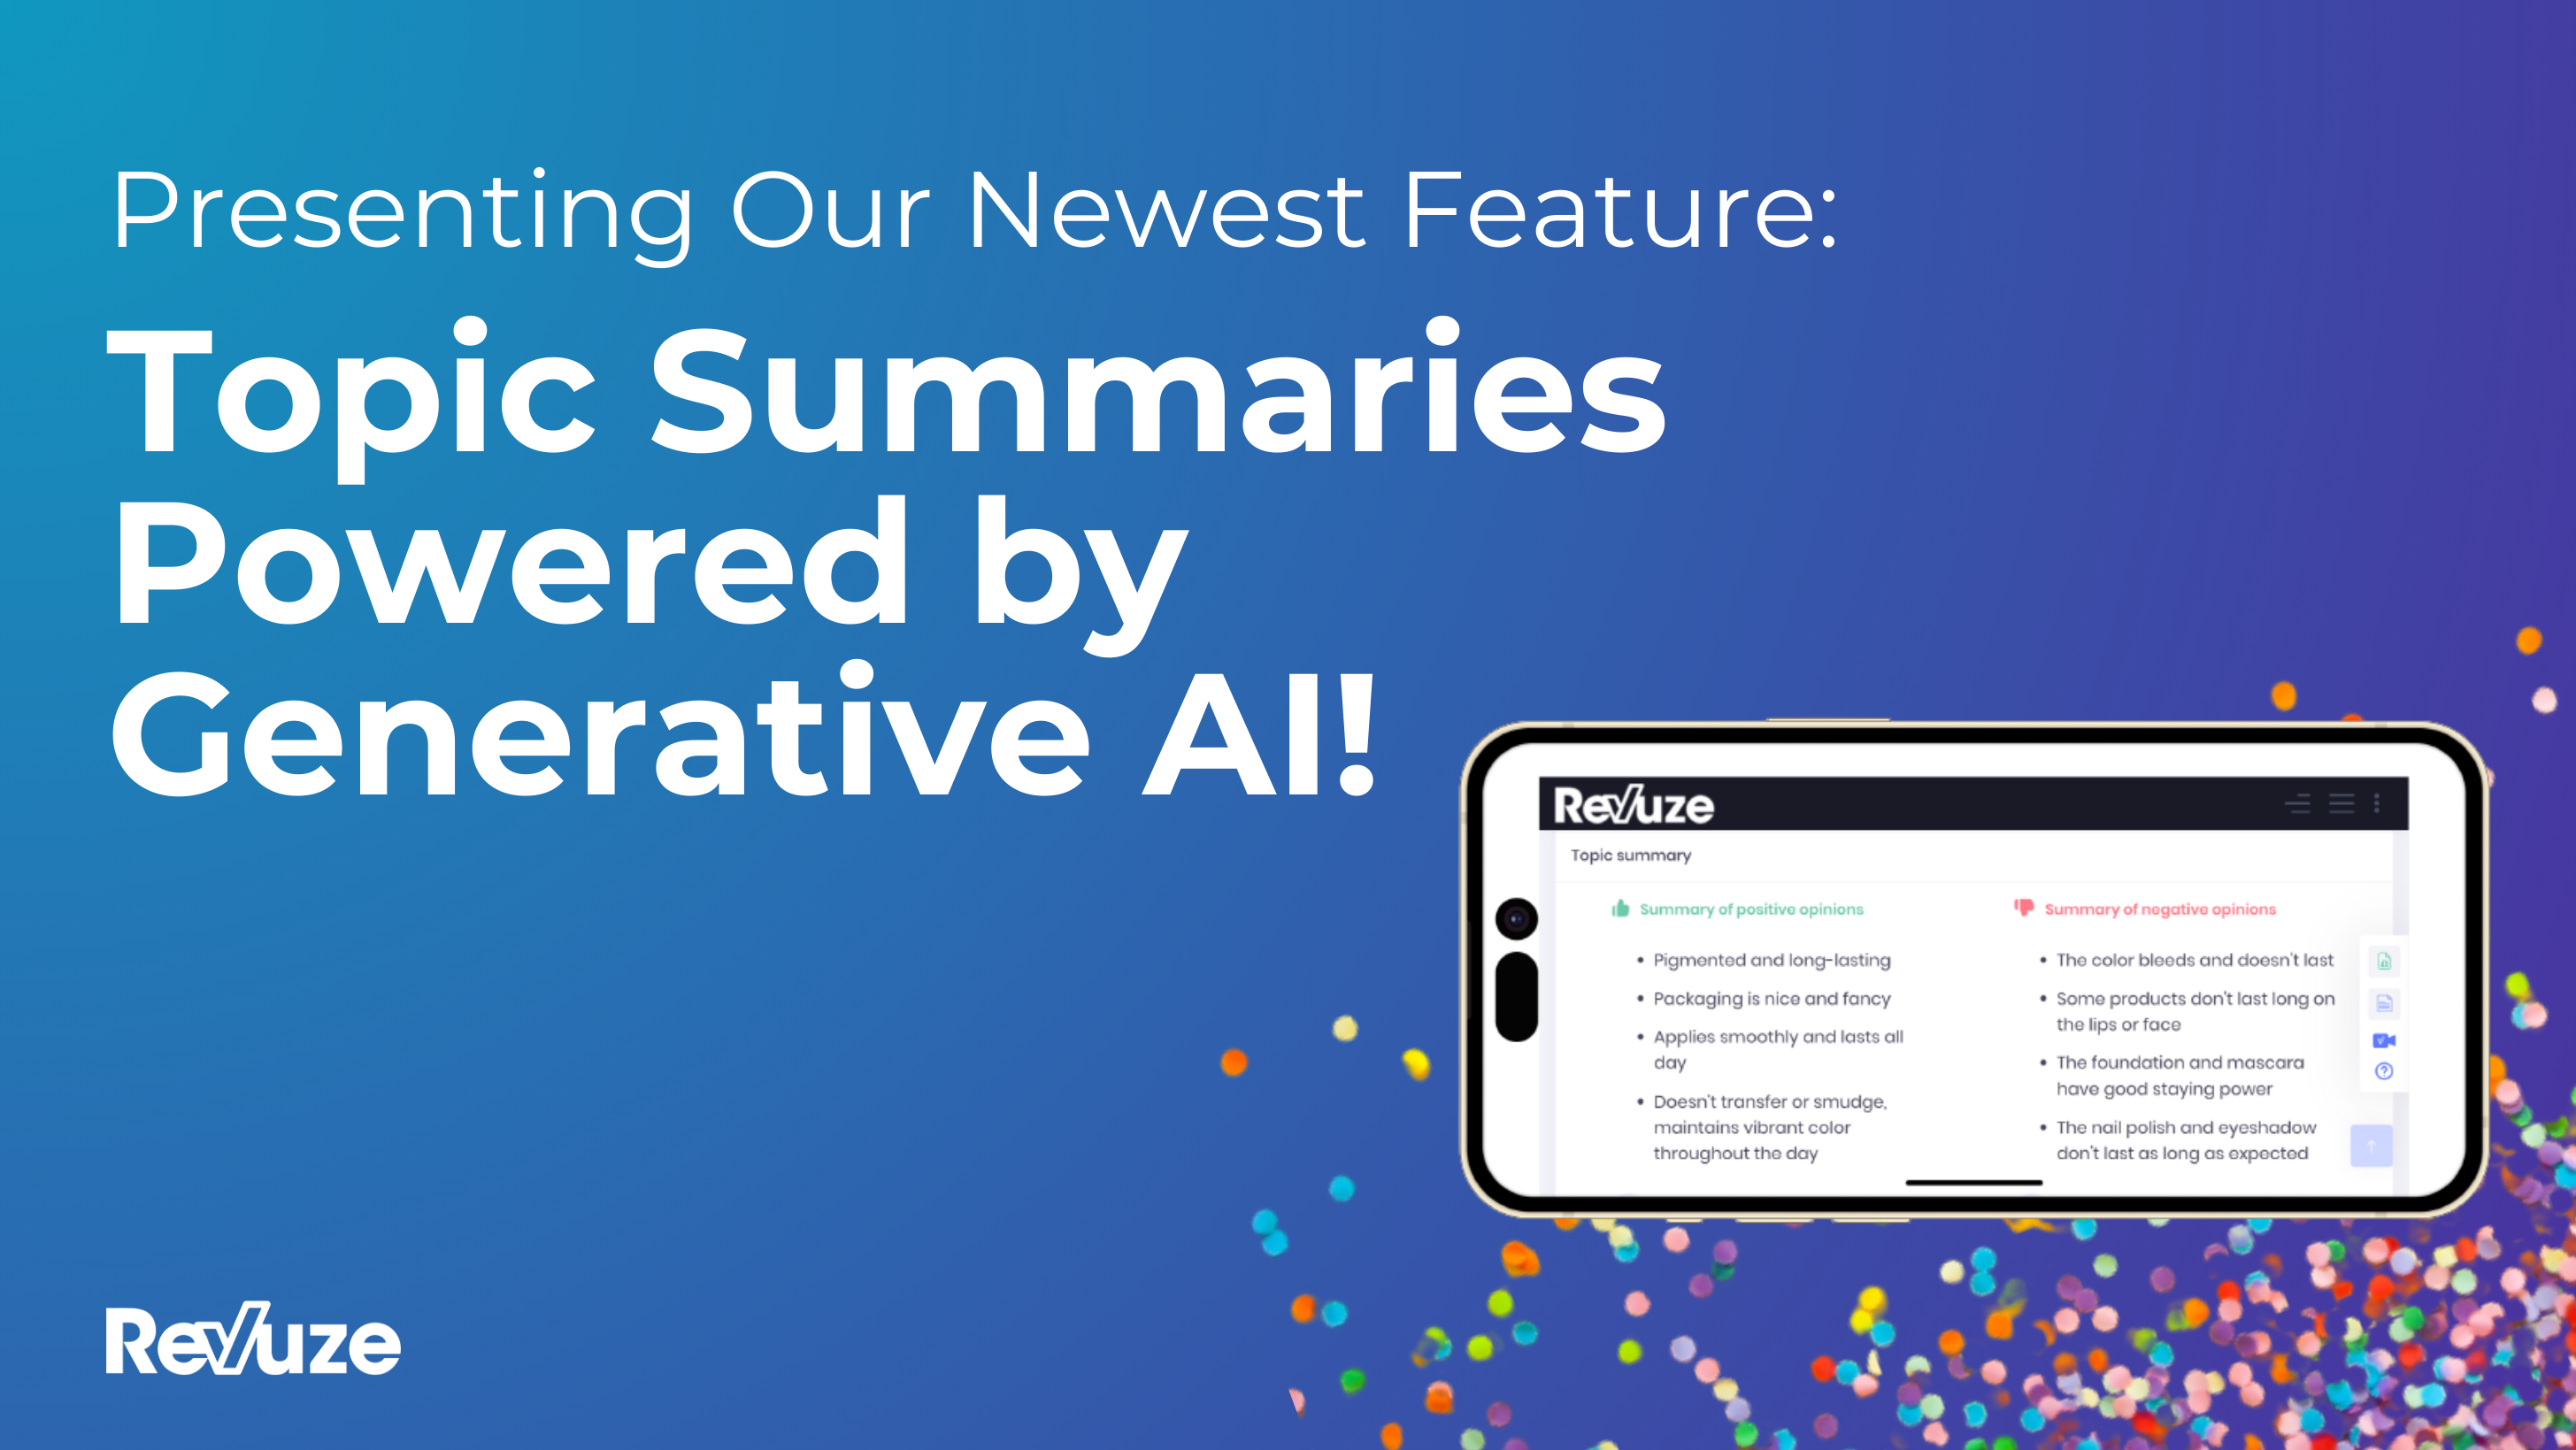 Presenting Our Newest Feature: Topic Summaries Powered by Generative AI